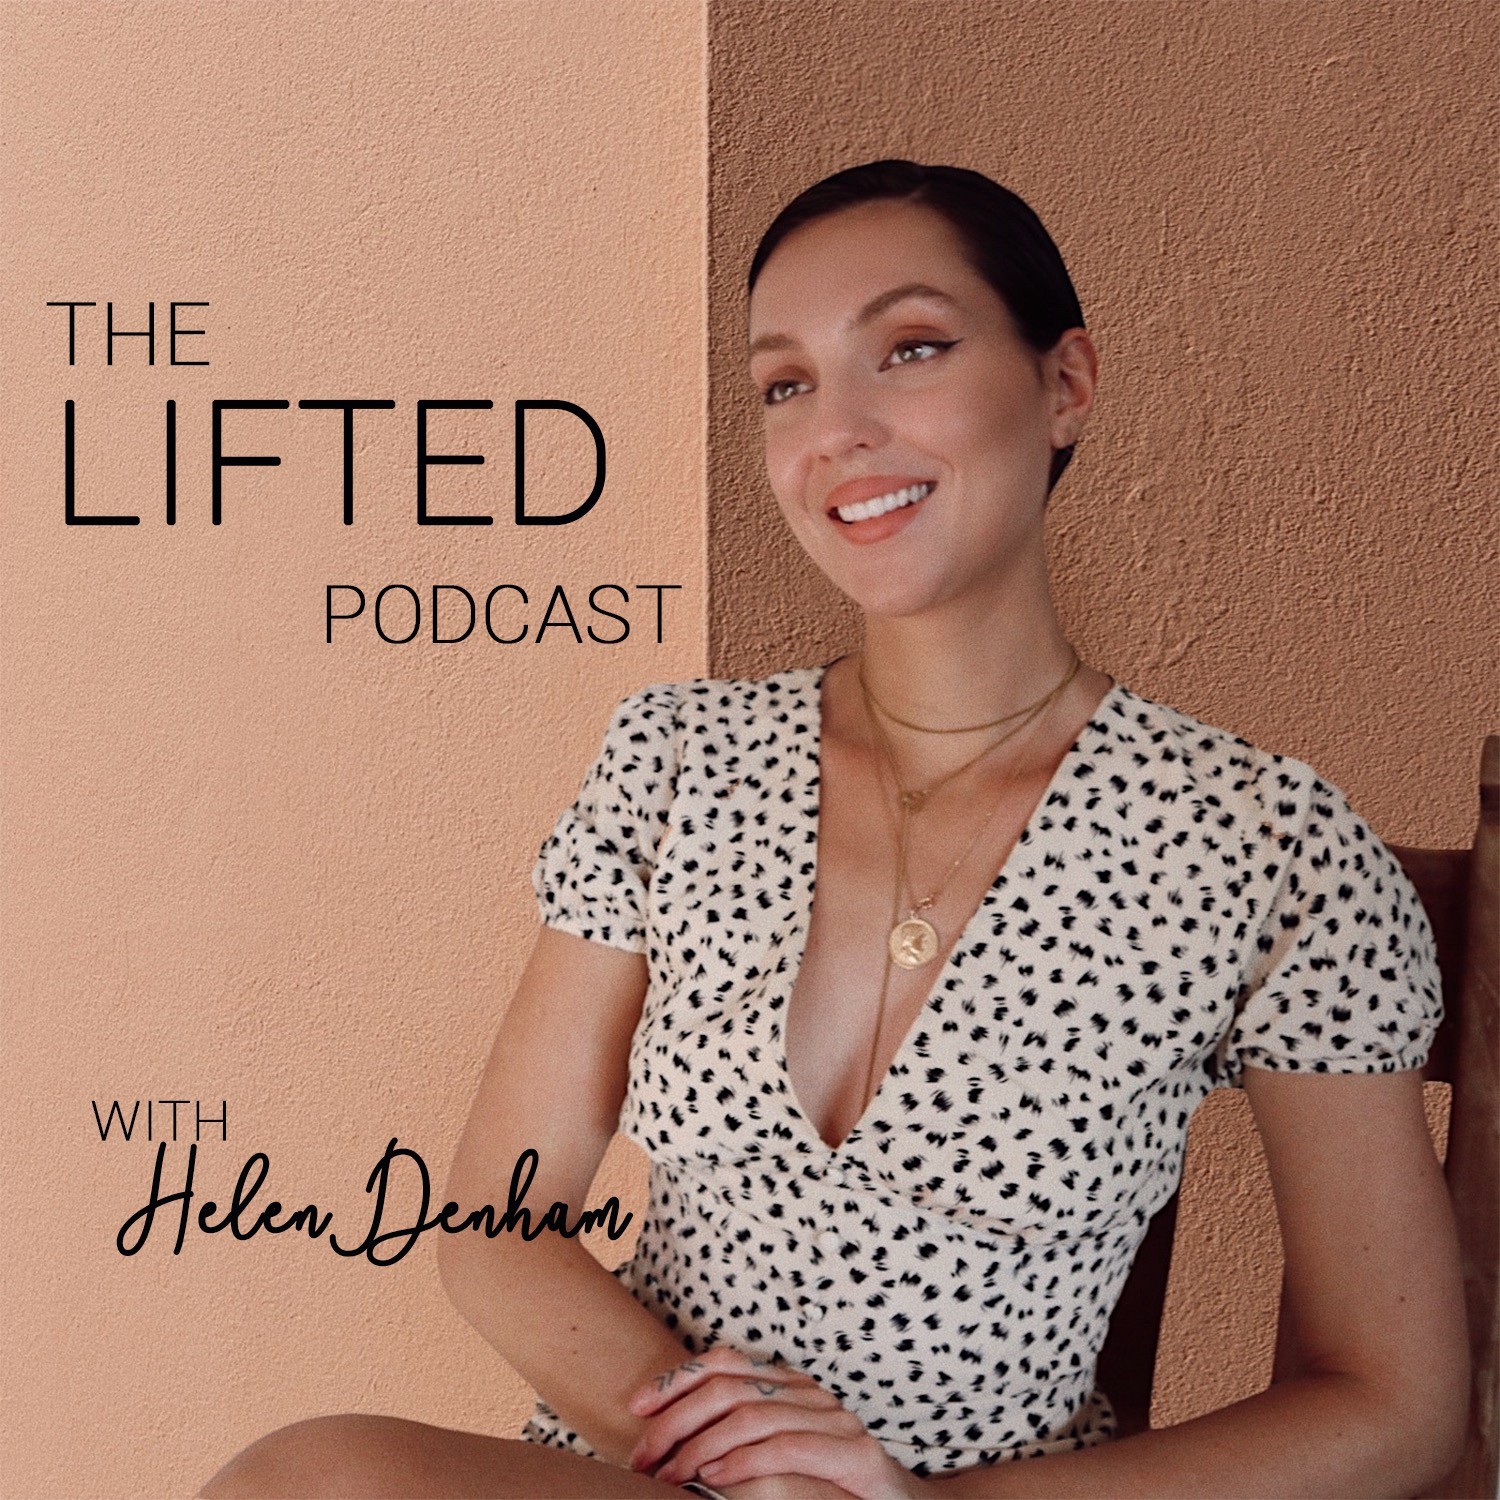 The Lifted Podcast